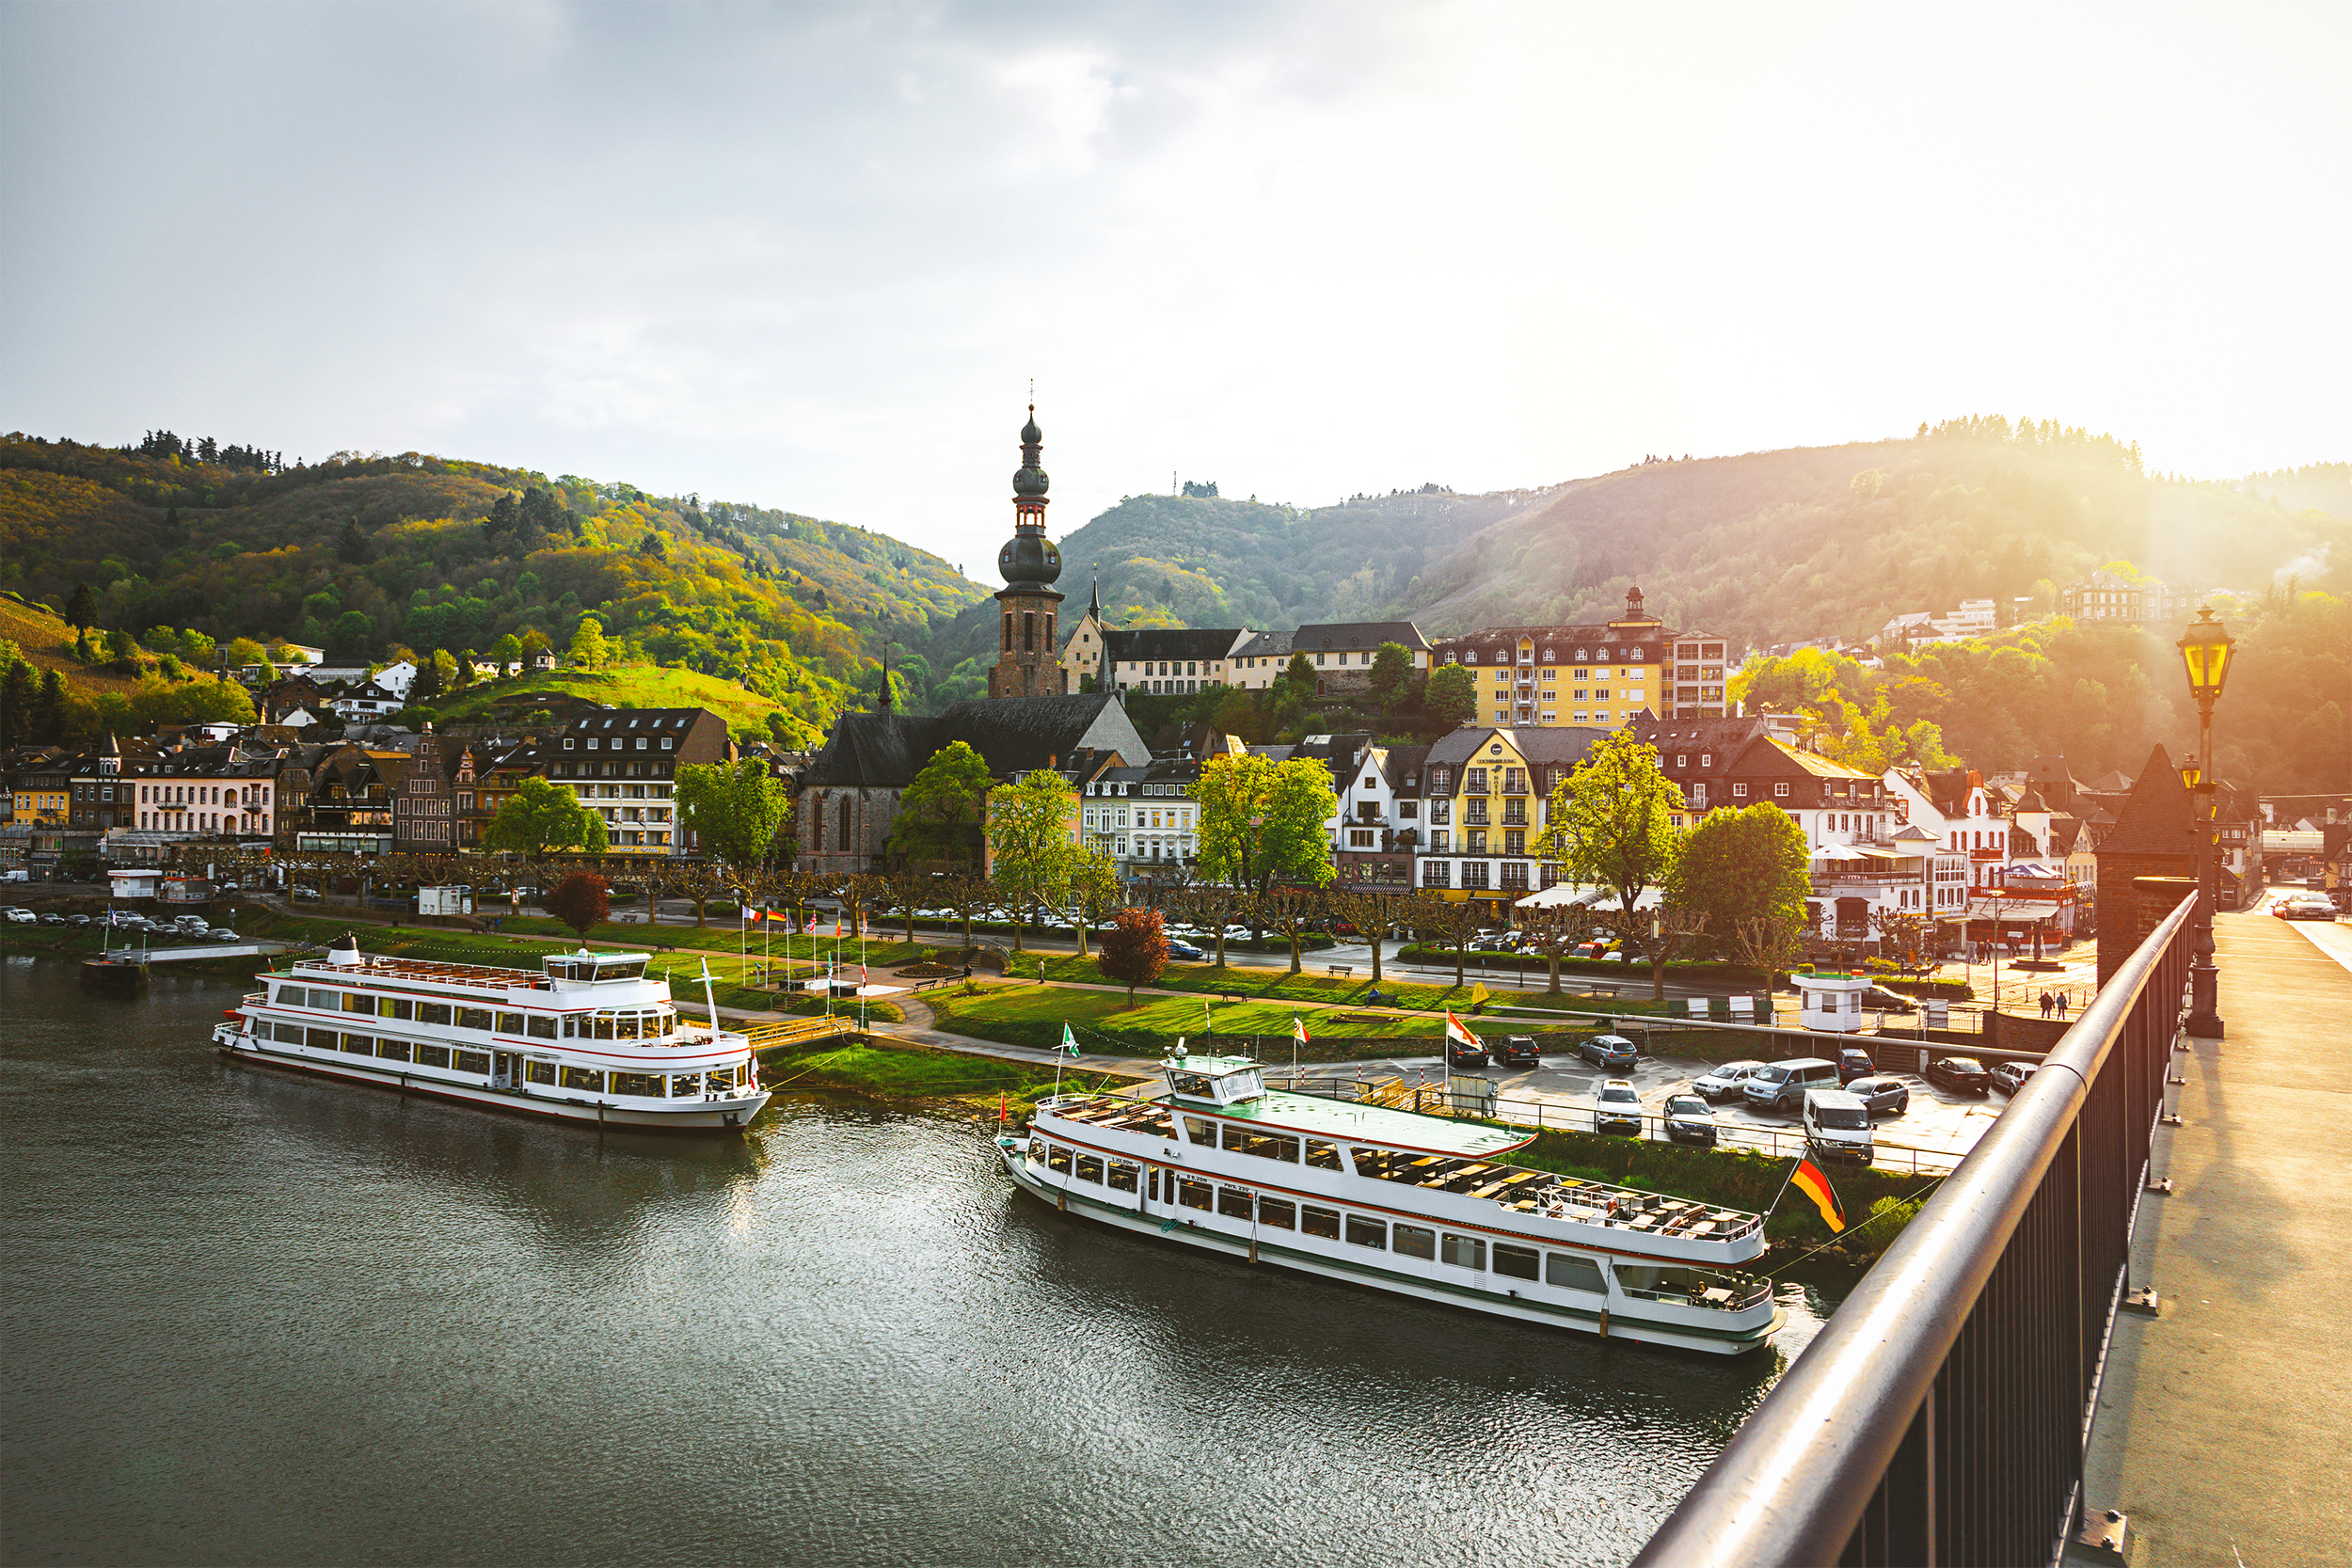 For many travelers, leisurely river cruises offer a range of sightseeing options without all the time and effort that goes into planning (and executing) the perfect multi-country trip, plus there’s a different view outside your window every day. On popular and affordable <a href="https://www.travelandleisure.com/cruises/river-cruises/european-river-cruises">European river cruises</a> along the Danube, Rhine, Seine, and Rhône — aboard smaller, hassle-free vessels rather than ocean behemoths — the destination is truly the journey itself. The pace on deck can be easygoing while meandering through picturesque landscapes and passengers can partake in a variety of shore excursions while docked in historic cities. Bike rides through medieval towns, vineyard wine tastings, and tours of spectacular bankside castles are an intimate way to explore Europe.